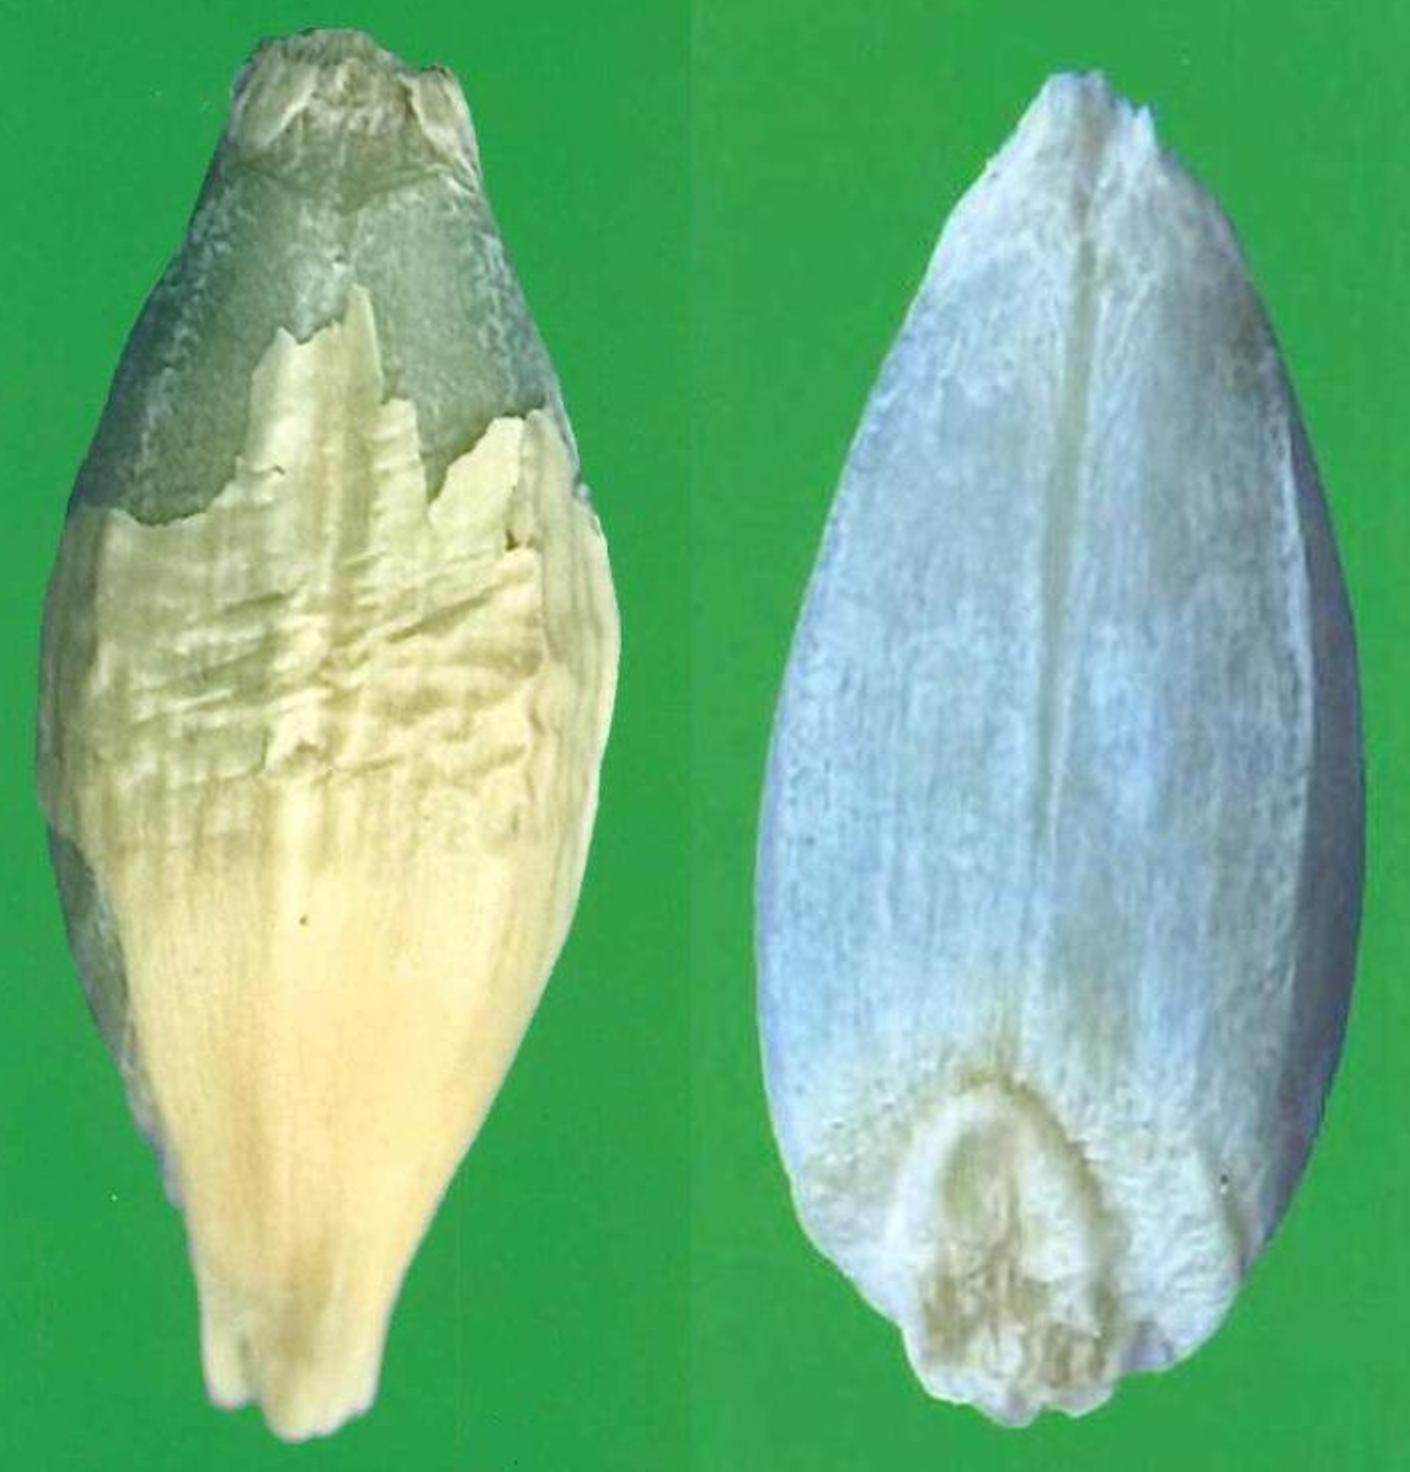 Two barley grains give a side by side comparison of the extent of blue coloring in the aleurone layer where the first has a blue tinge that is only seen when the husk is removed, the second is bright enough to show clearly through the husk